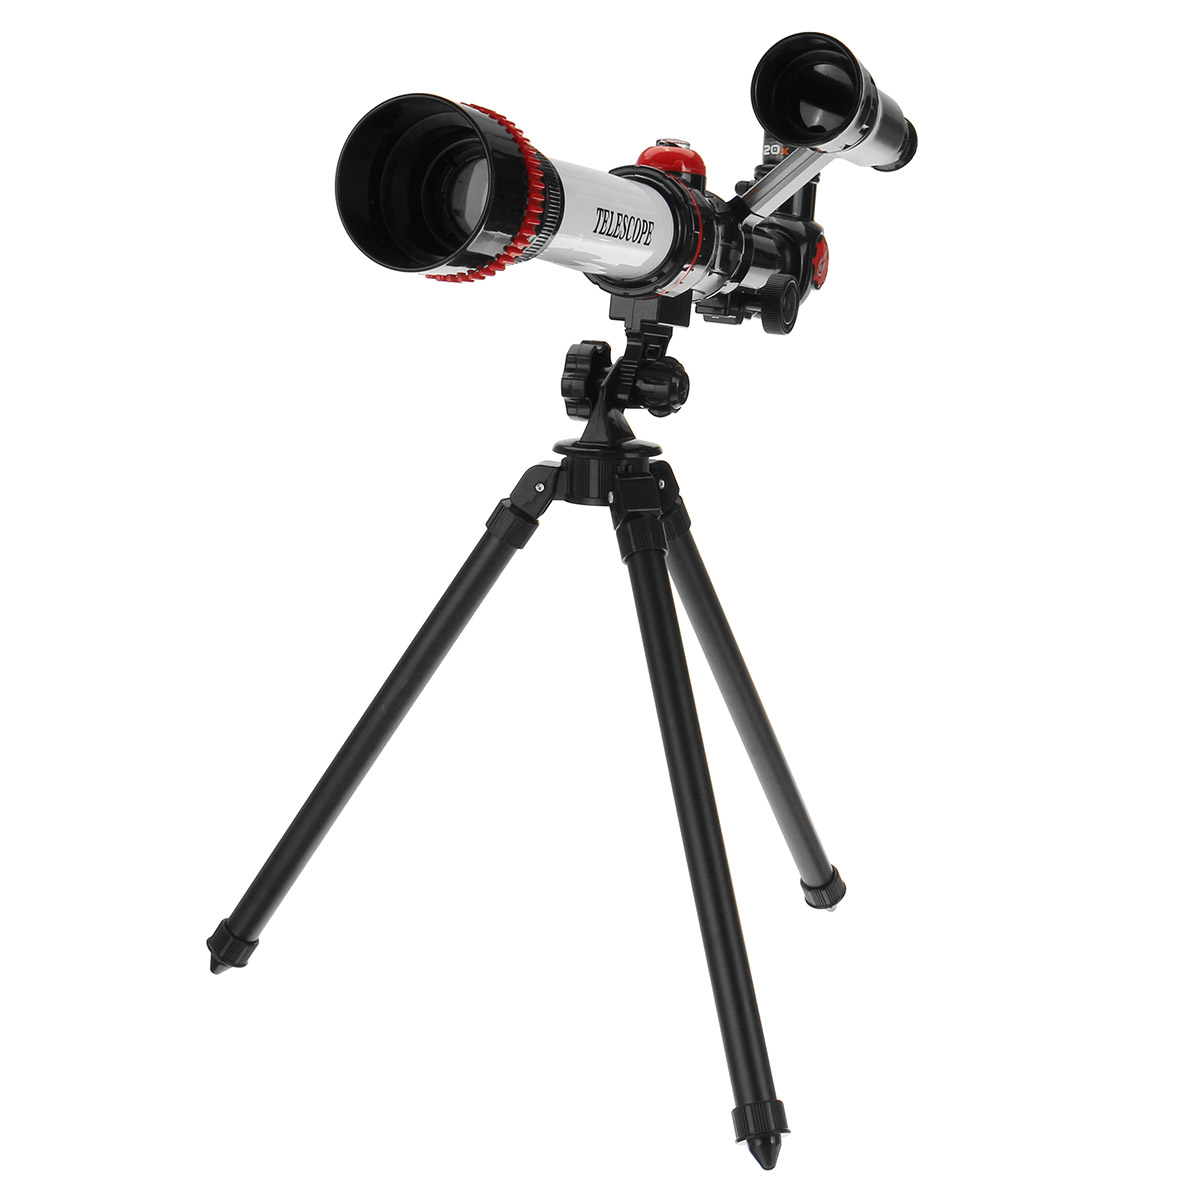 30-40X-Astronomical-Telescope-HD-Refraction-Optical-Monoculars-for-Adult-Kids-Beginners-with-Tripod-1836751-10